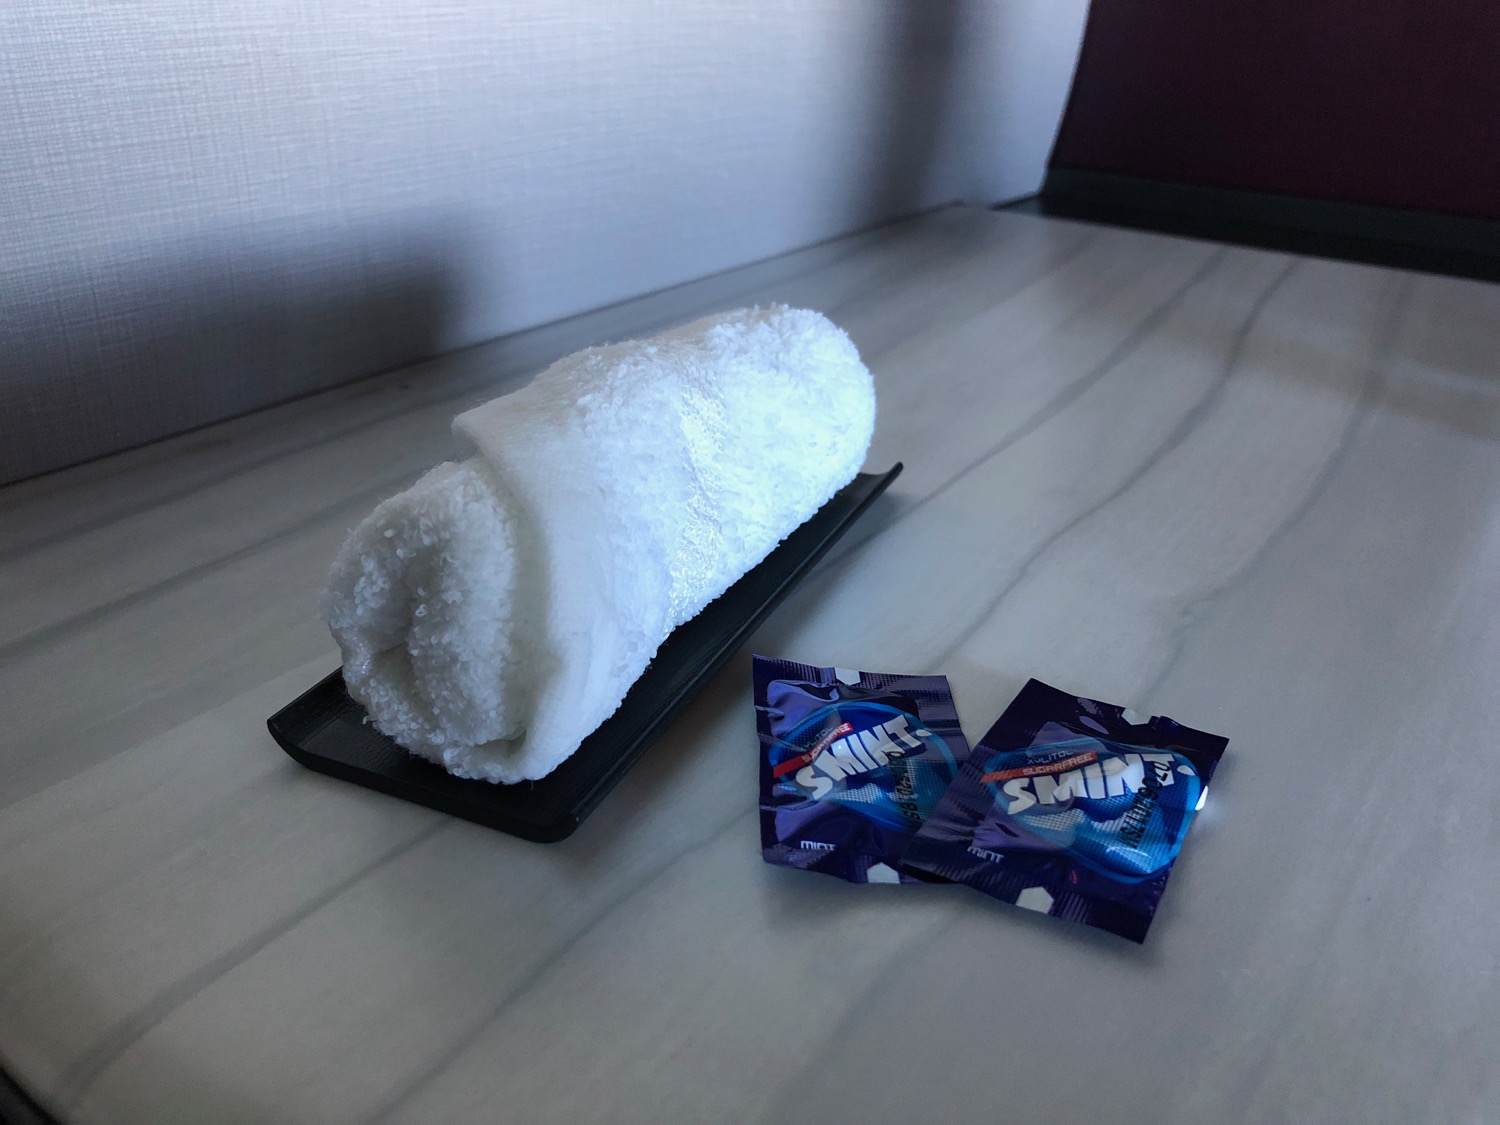 a towel roll and two packages of candy